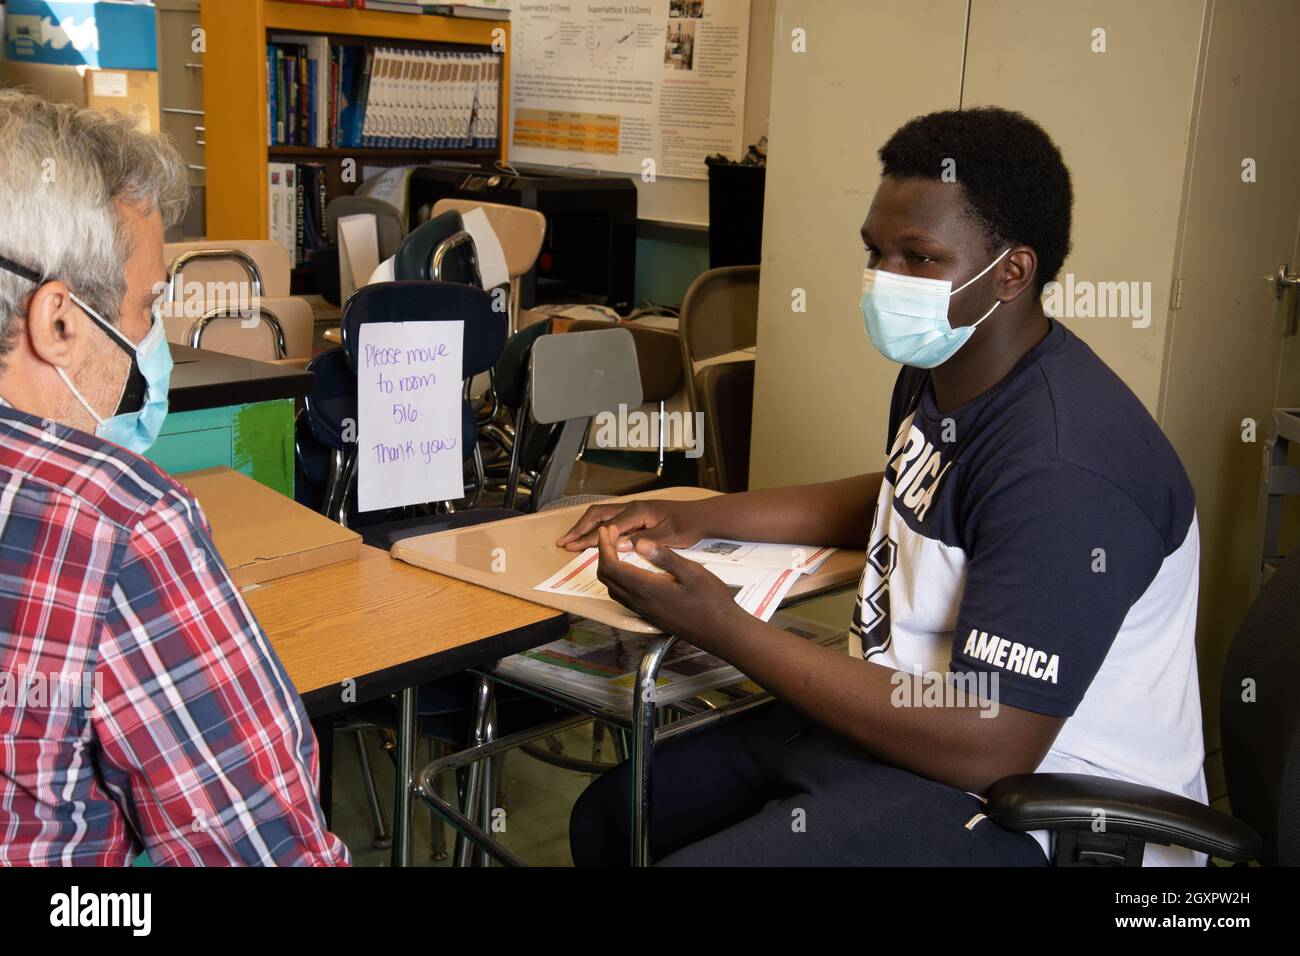 Education High School classroom scene male teacher talking with male student, both wearing face masks to protect against Covid-19 infection Stock Photo